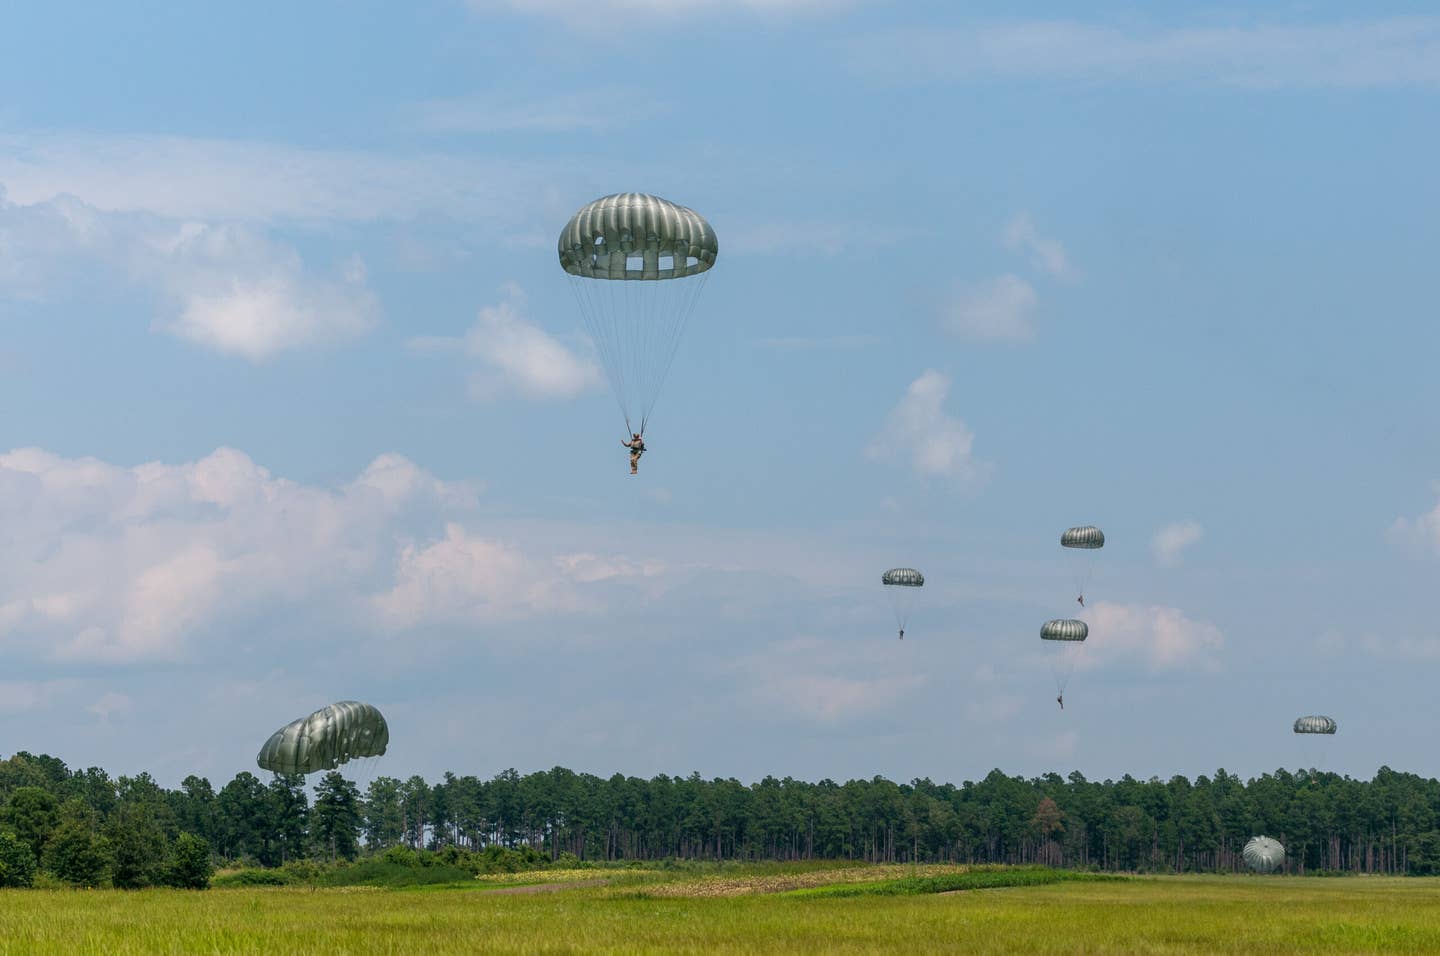 soldiers parachuting in a training exercise.